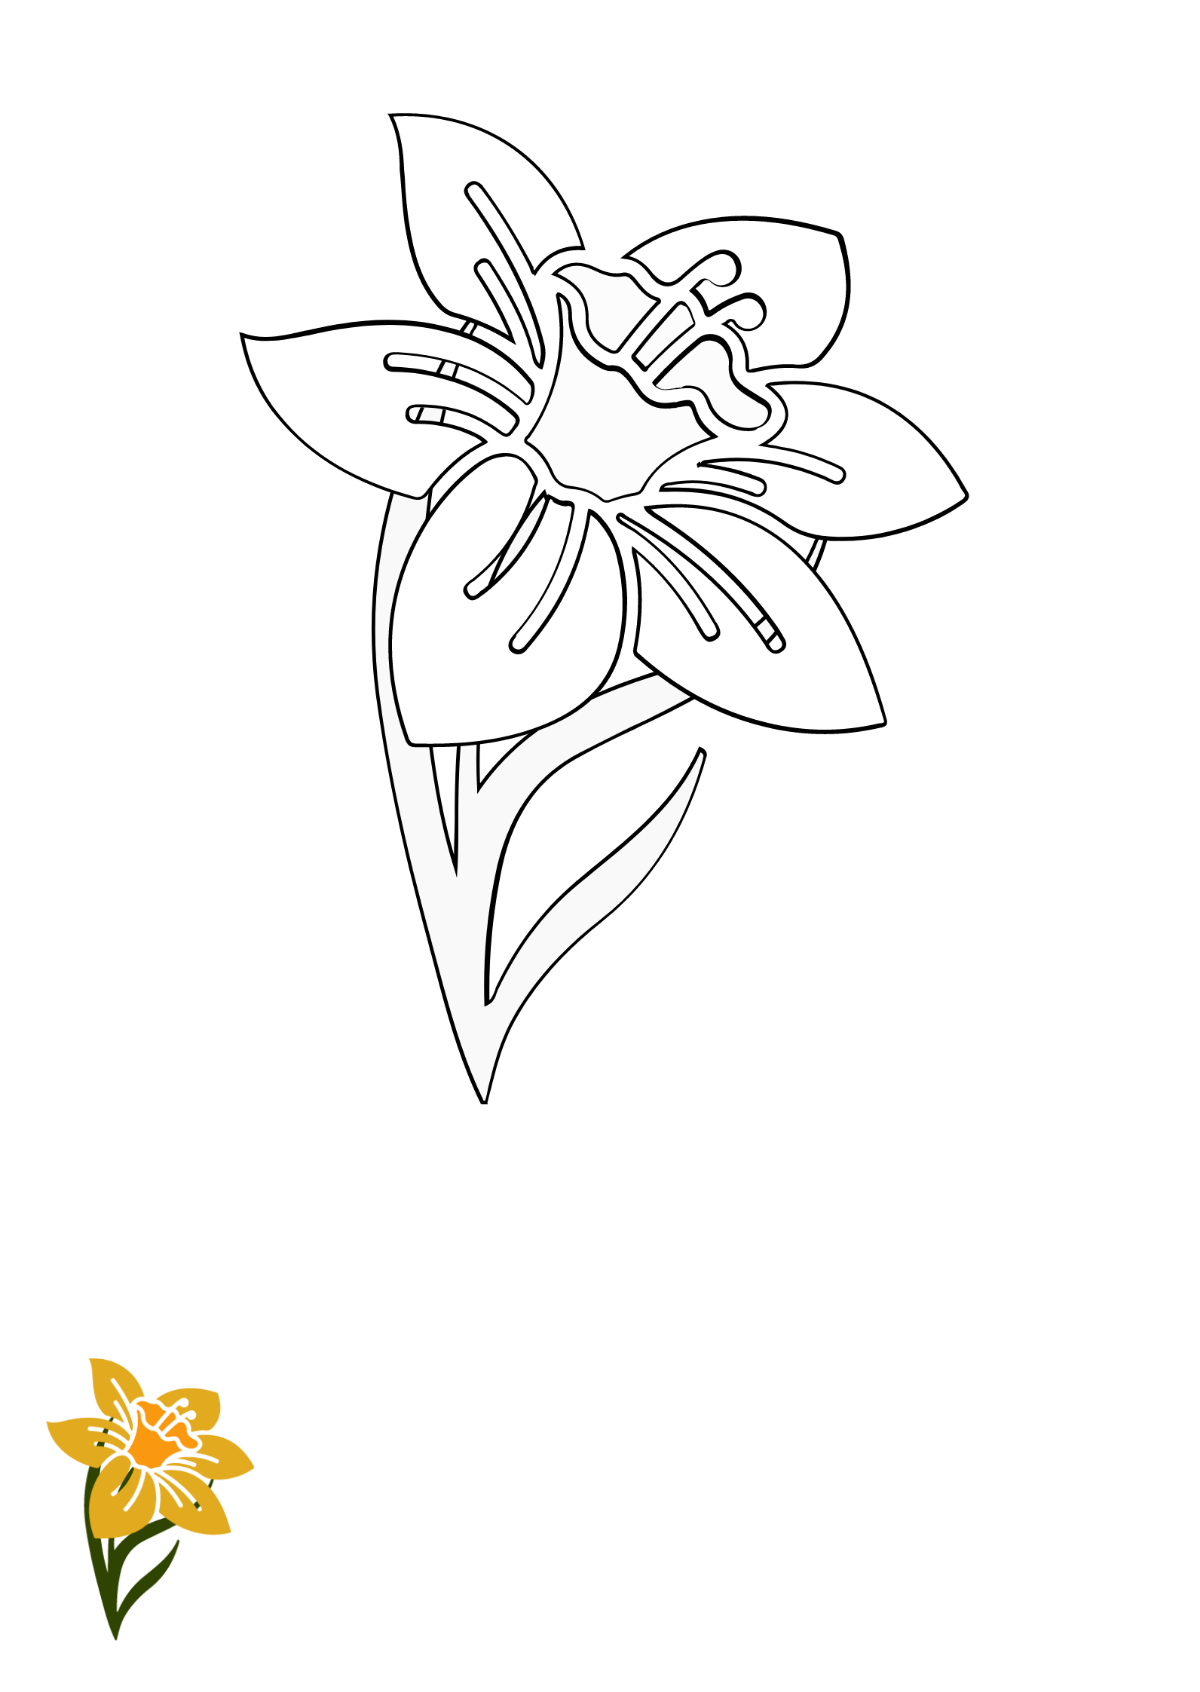 Daffodil Flower Coloring Page Template